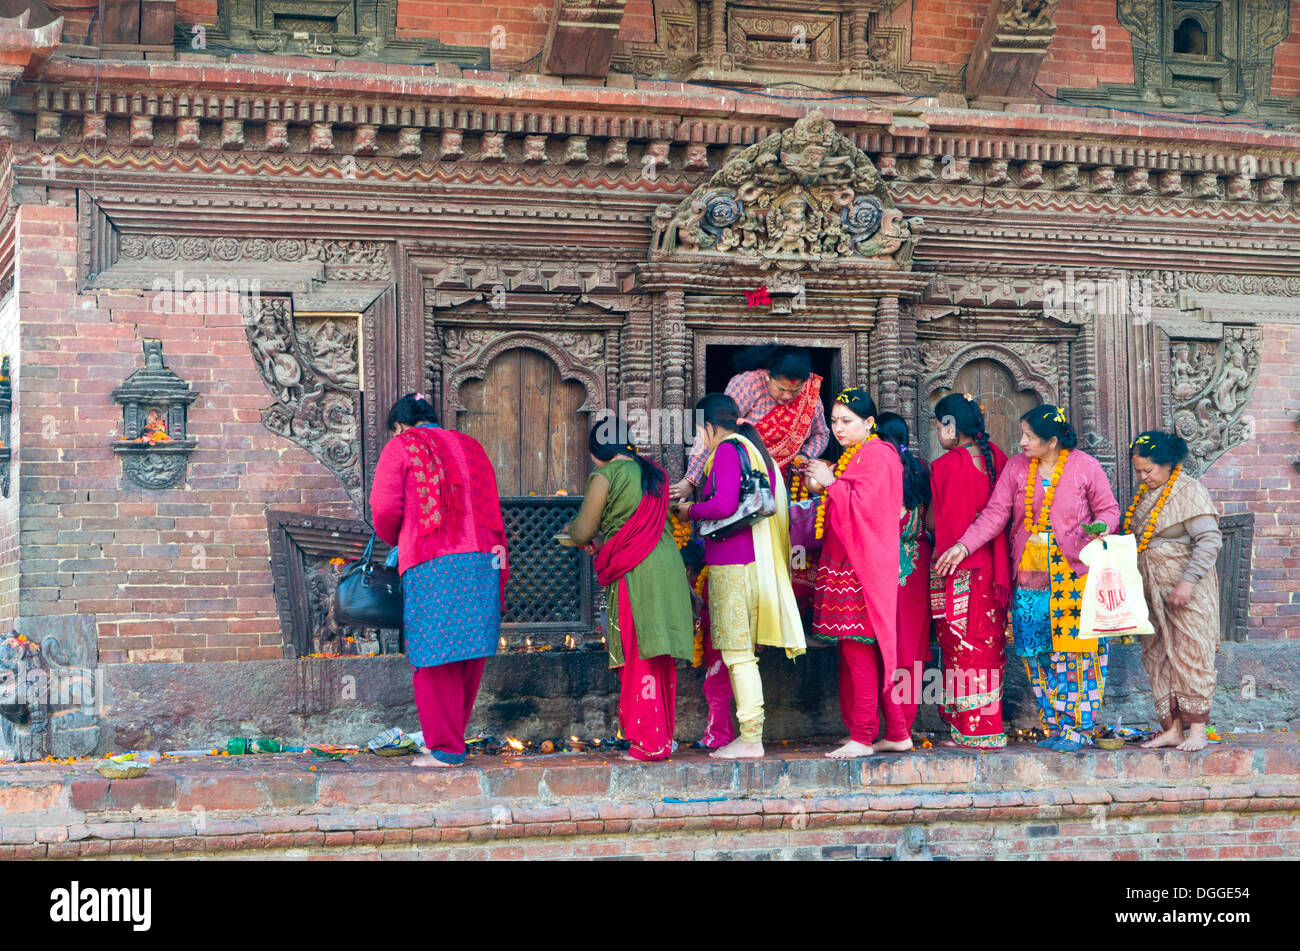 Women queuing to make offerings at a temple on Patan Durbar Square, Patan, Lalitpur District, Bagmati Zone, Nepal Stock Photo